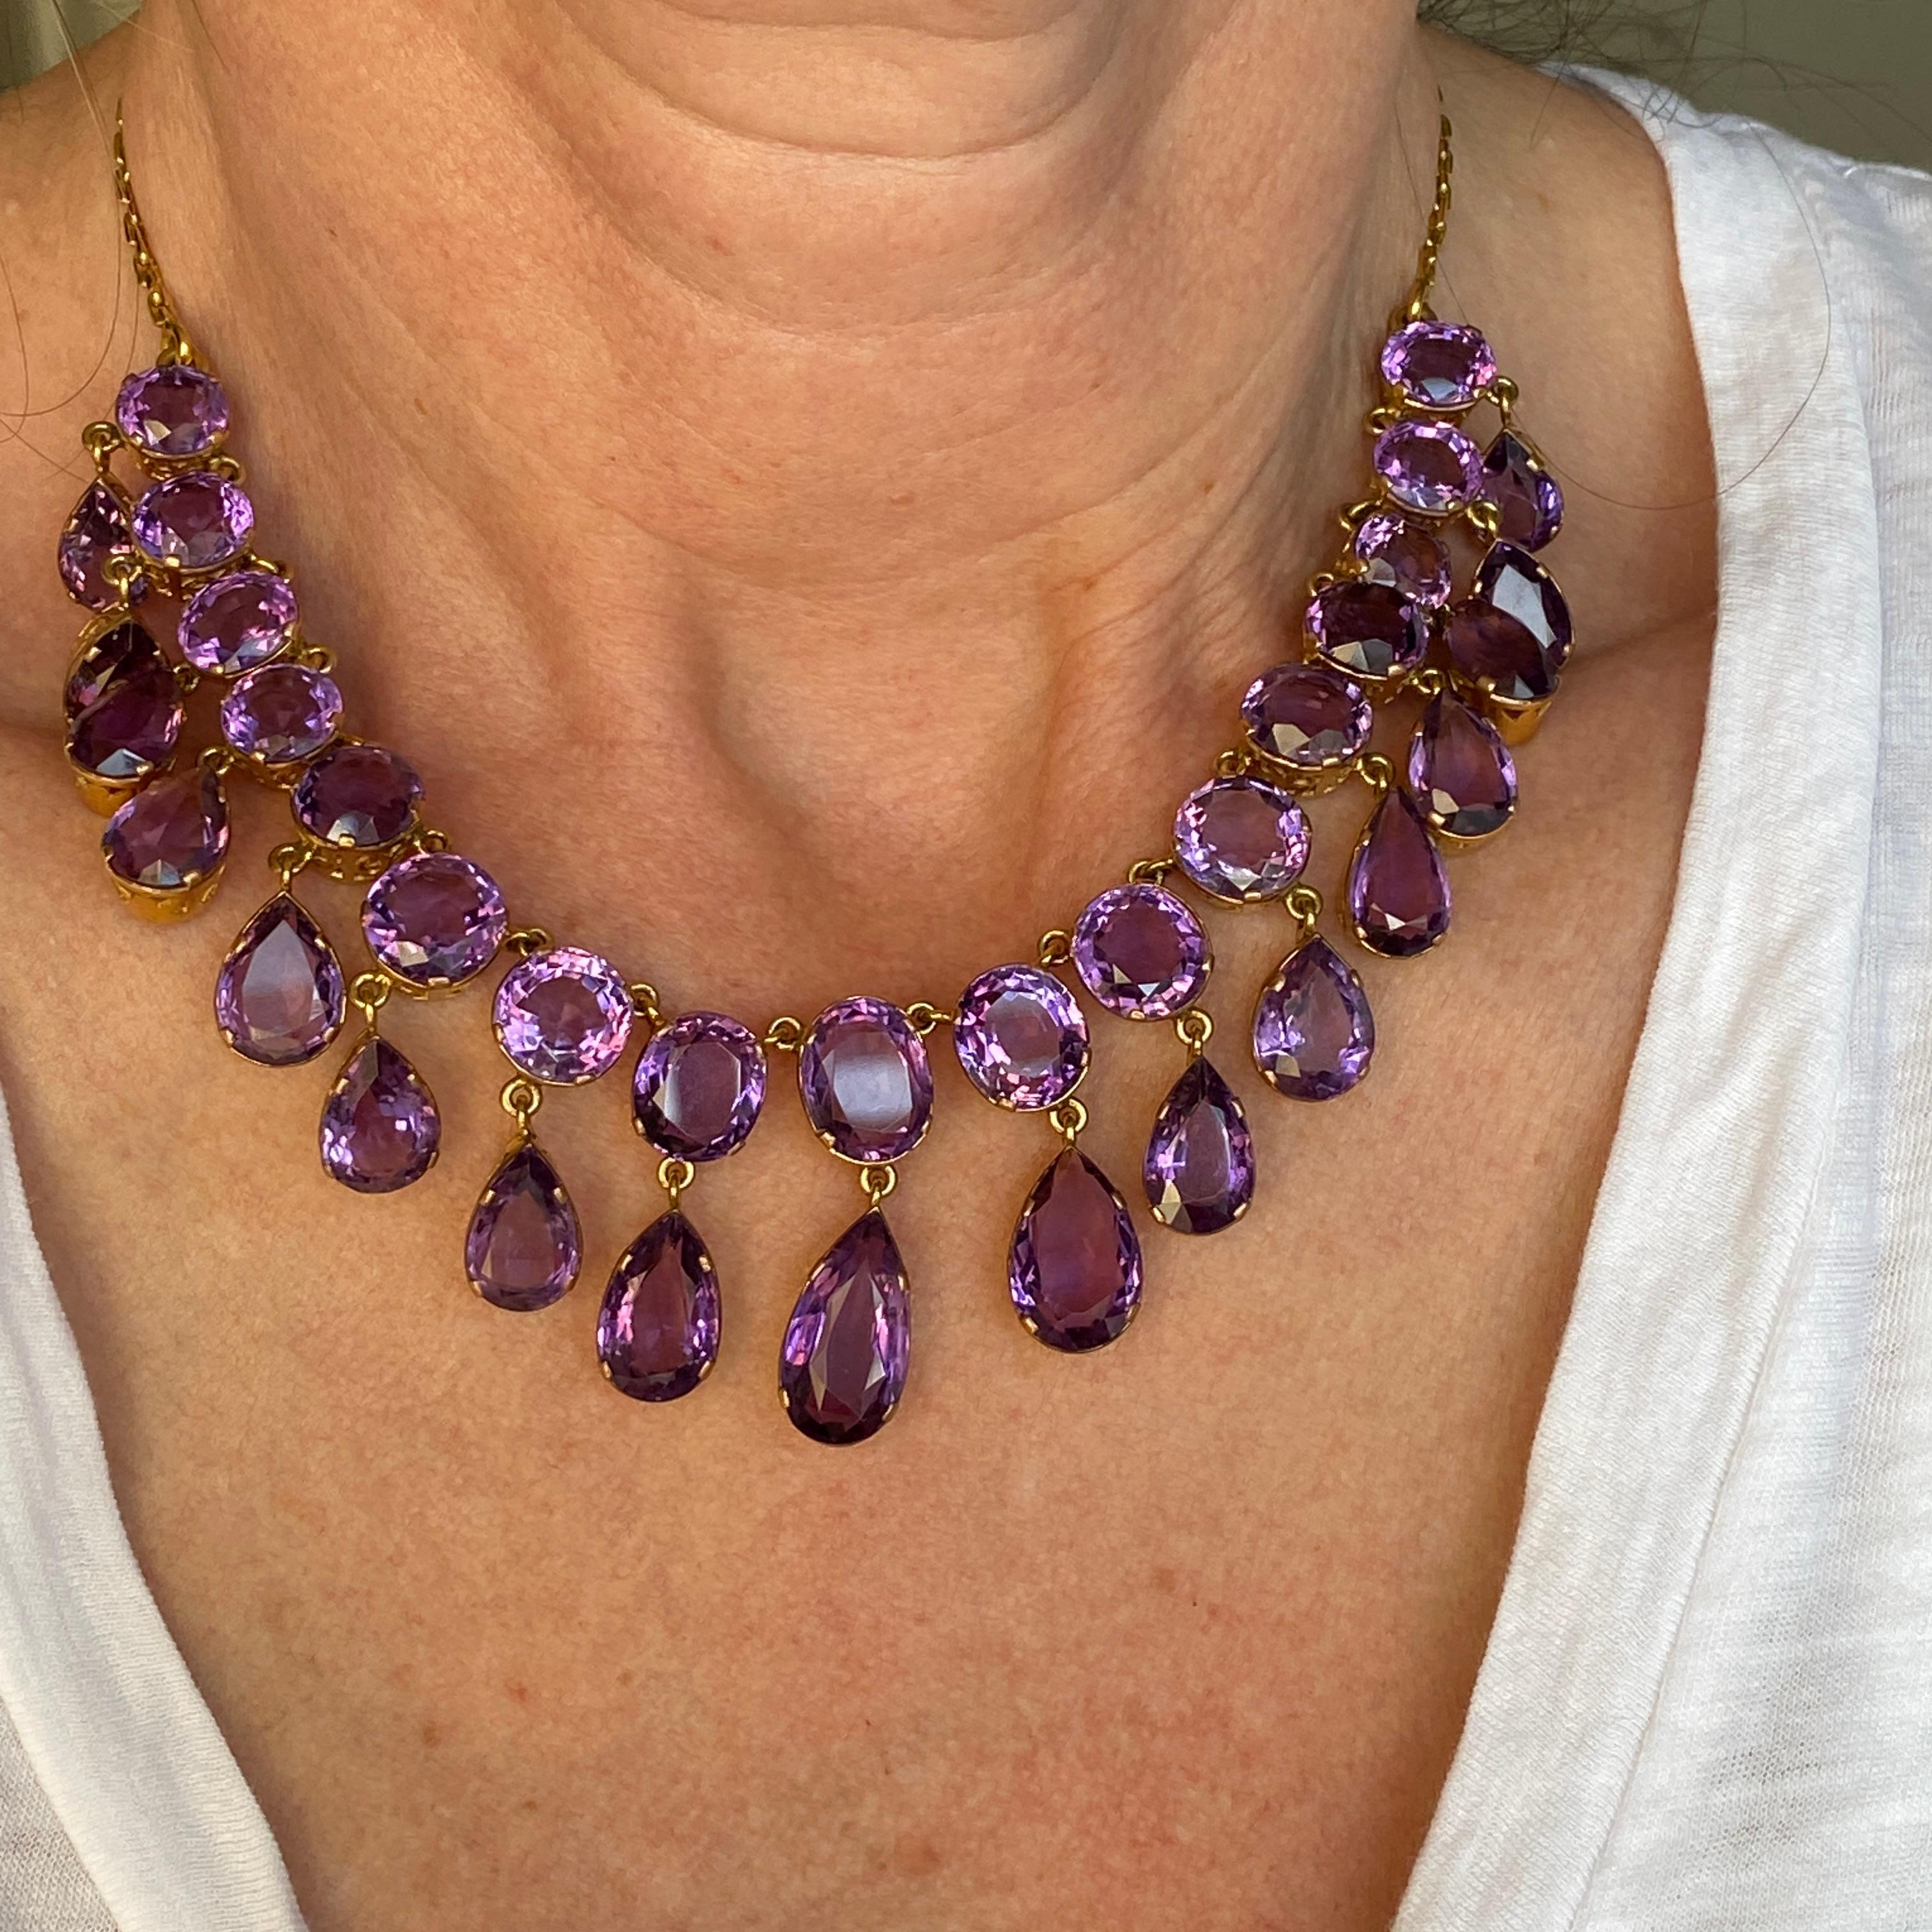 Details:
Stunning Mid Century Amethyst and 14K gold necklace. This gorgeous piece begs to be worn to a grand ball or the Met Gala! Simply stunning! 53 carats of gorgeous amethysts, with lovely color saturation, this necklace is a show stopper! The